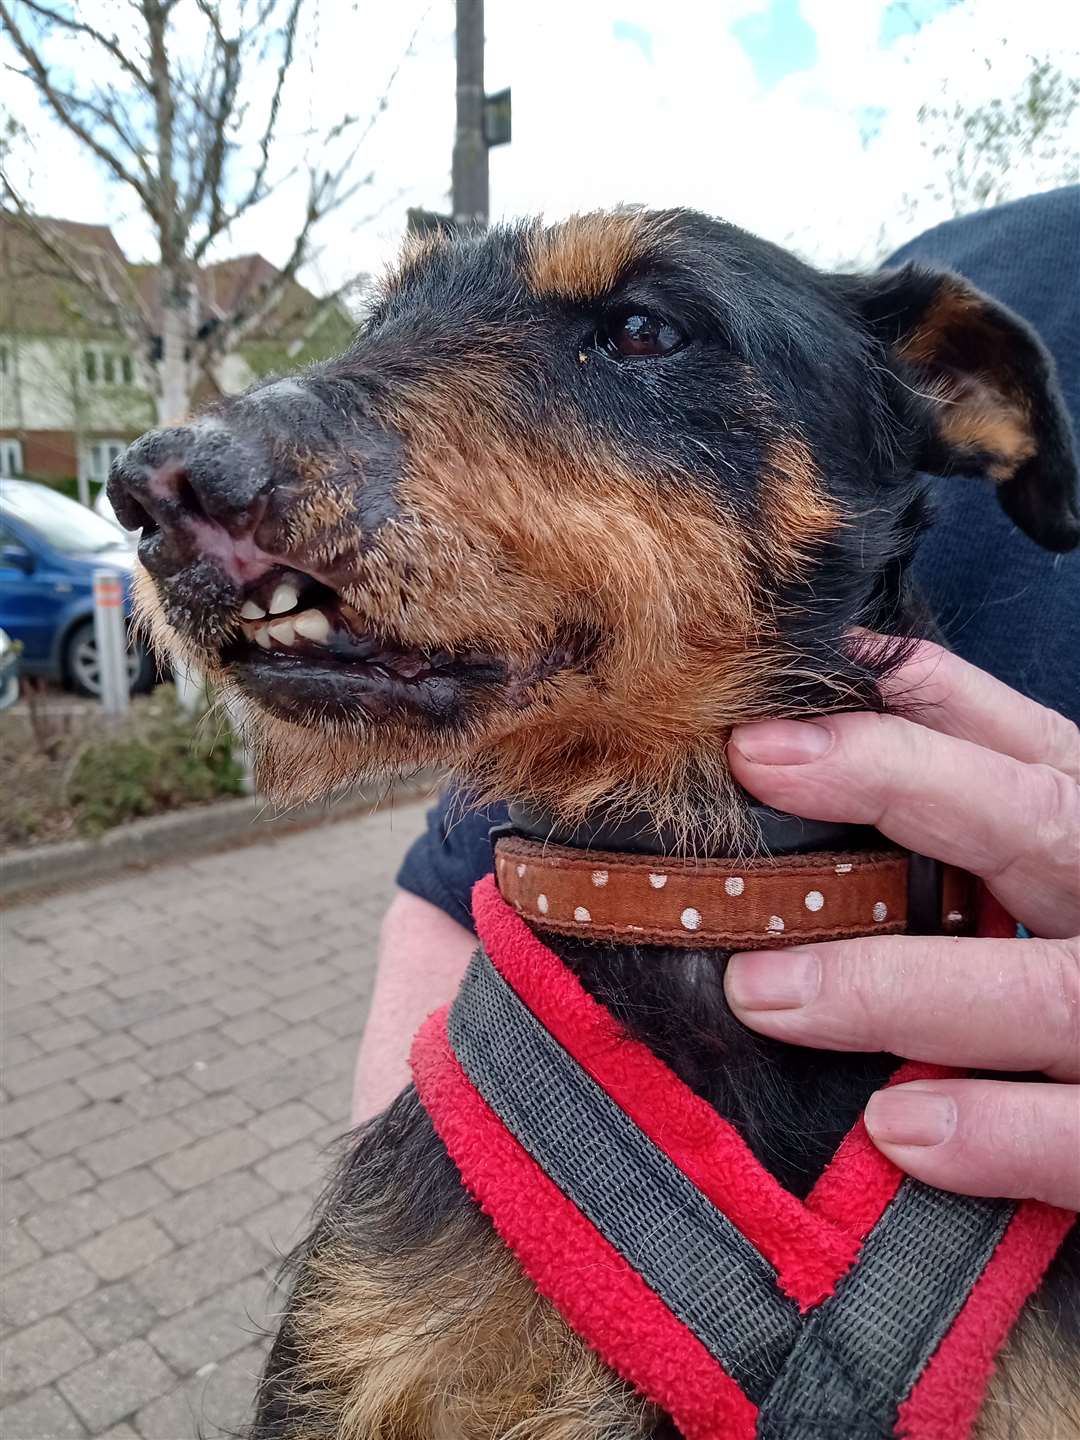 Terrier Skip is recovering from severe facial injuries